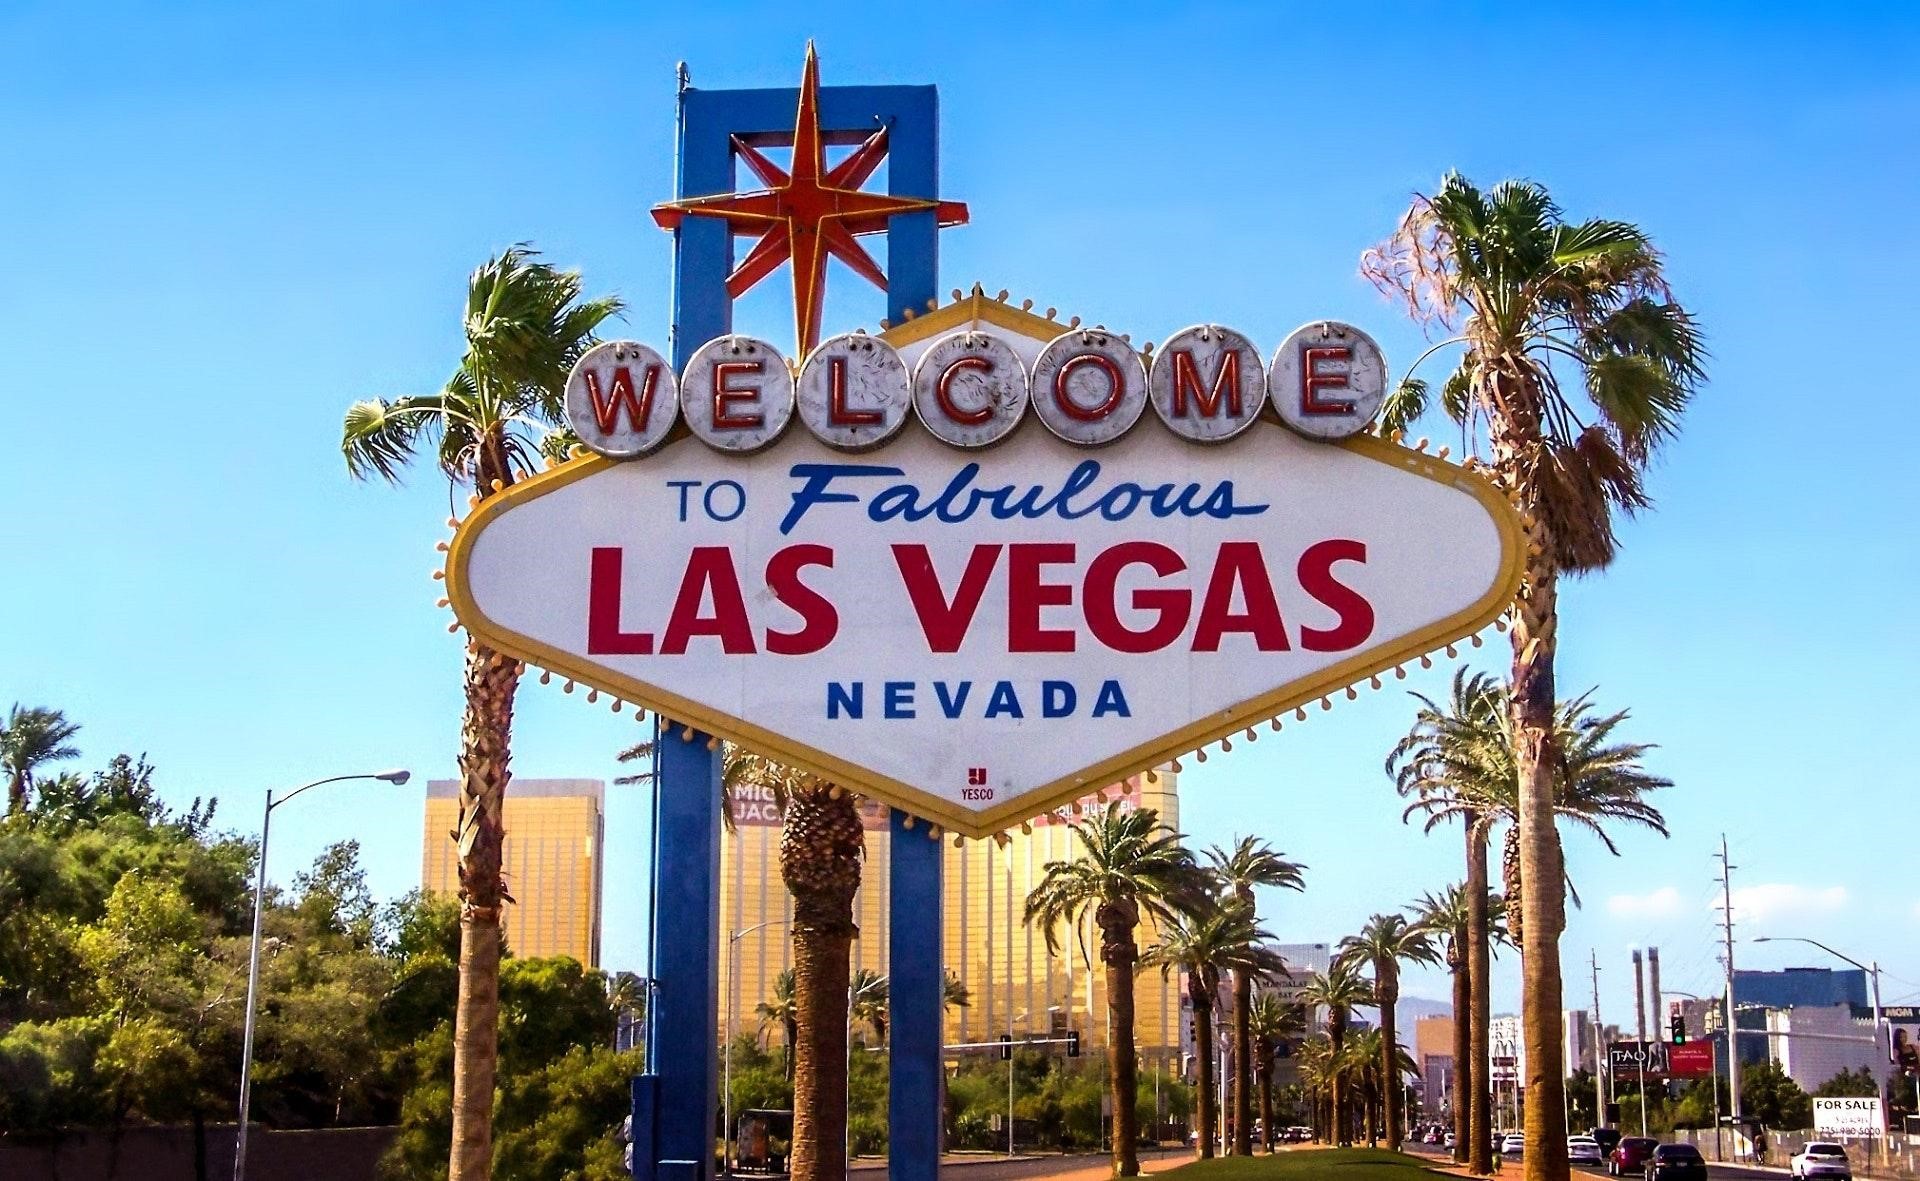 Nevada Smashes Gaming Revenue Record for the Second Month in a Row with $1.24B in February